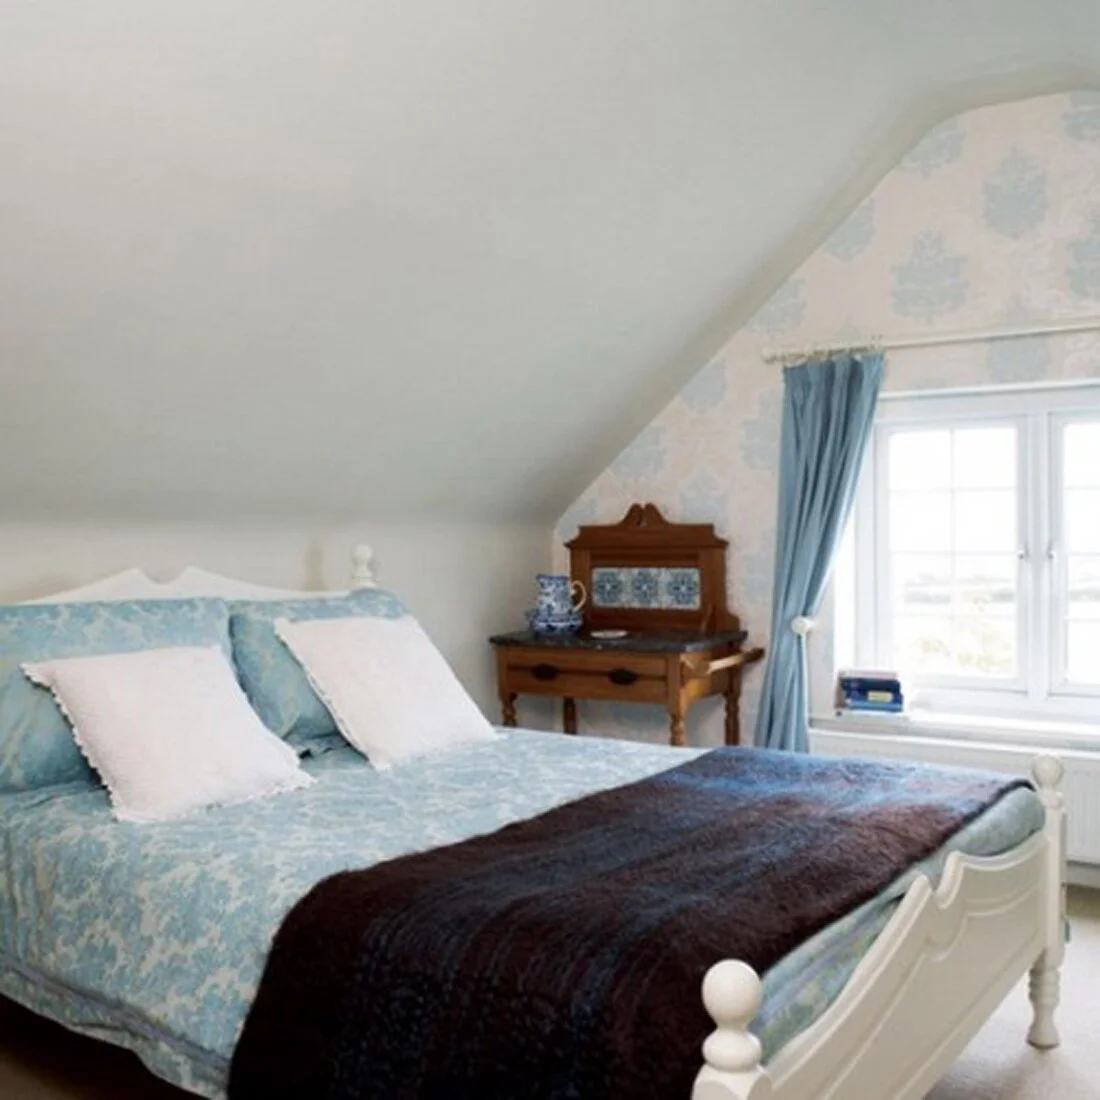 Bedrooms Feminine Simple White And Soft Blue Attic Bedroom Design Idea Inside Bedroom Design Ideas Blue